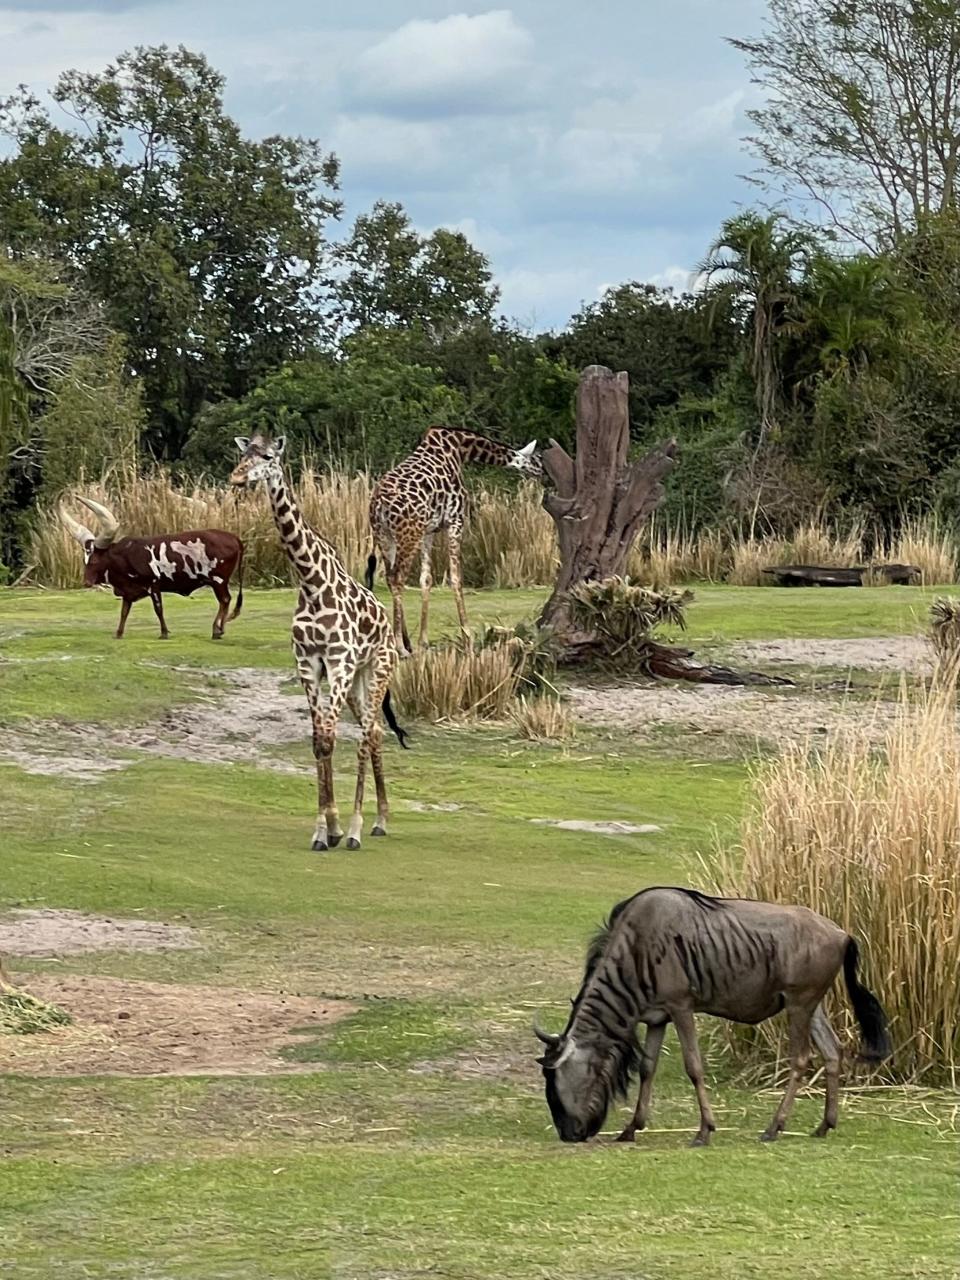 Guests can see all sorts of animals, including some endangered species, on Kilimanjaro Safaris at Disney's Animal Kingdom.